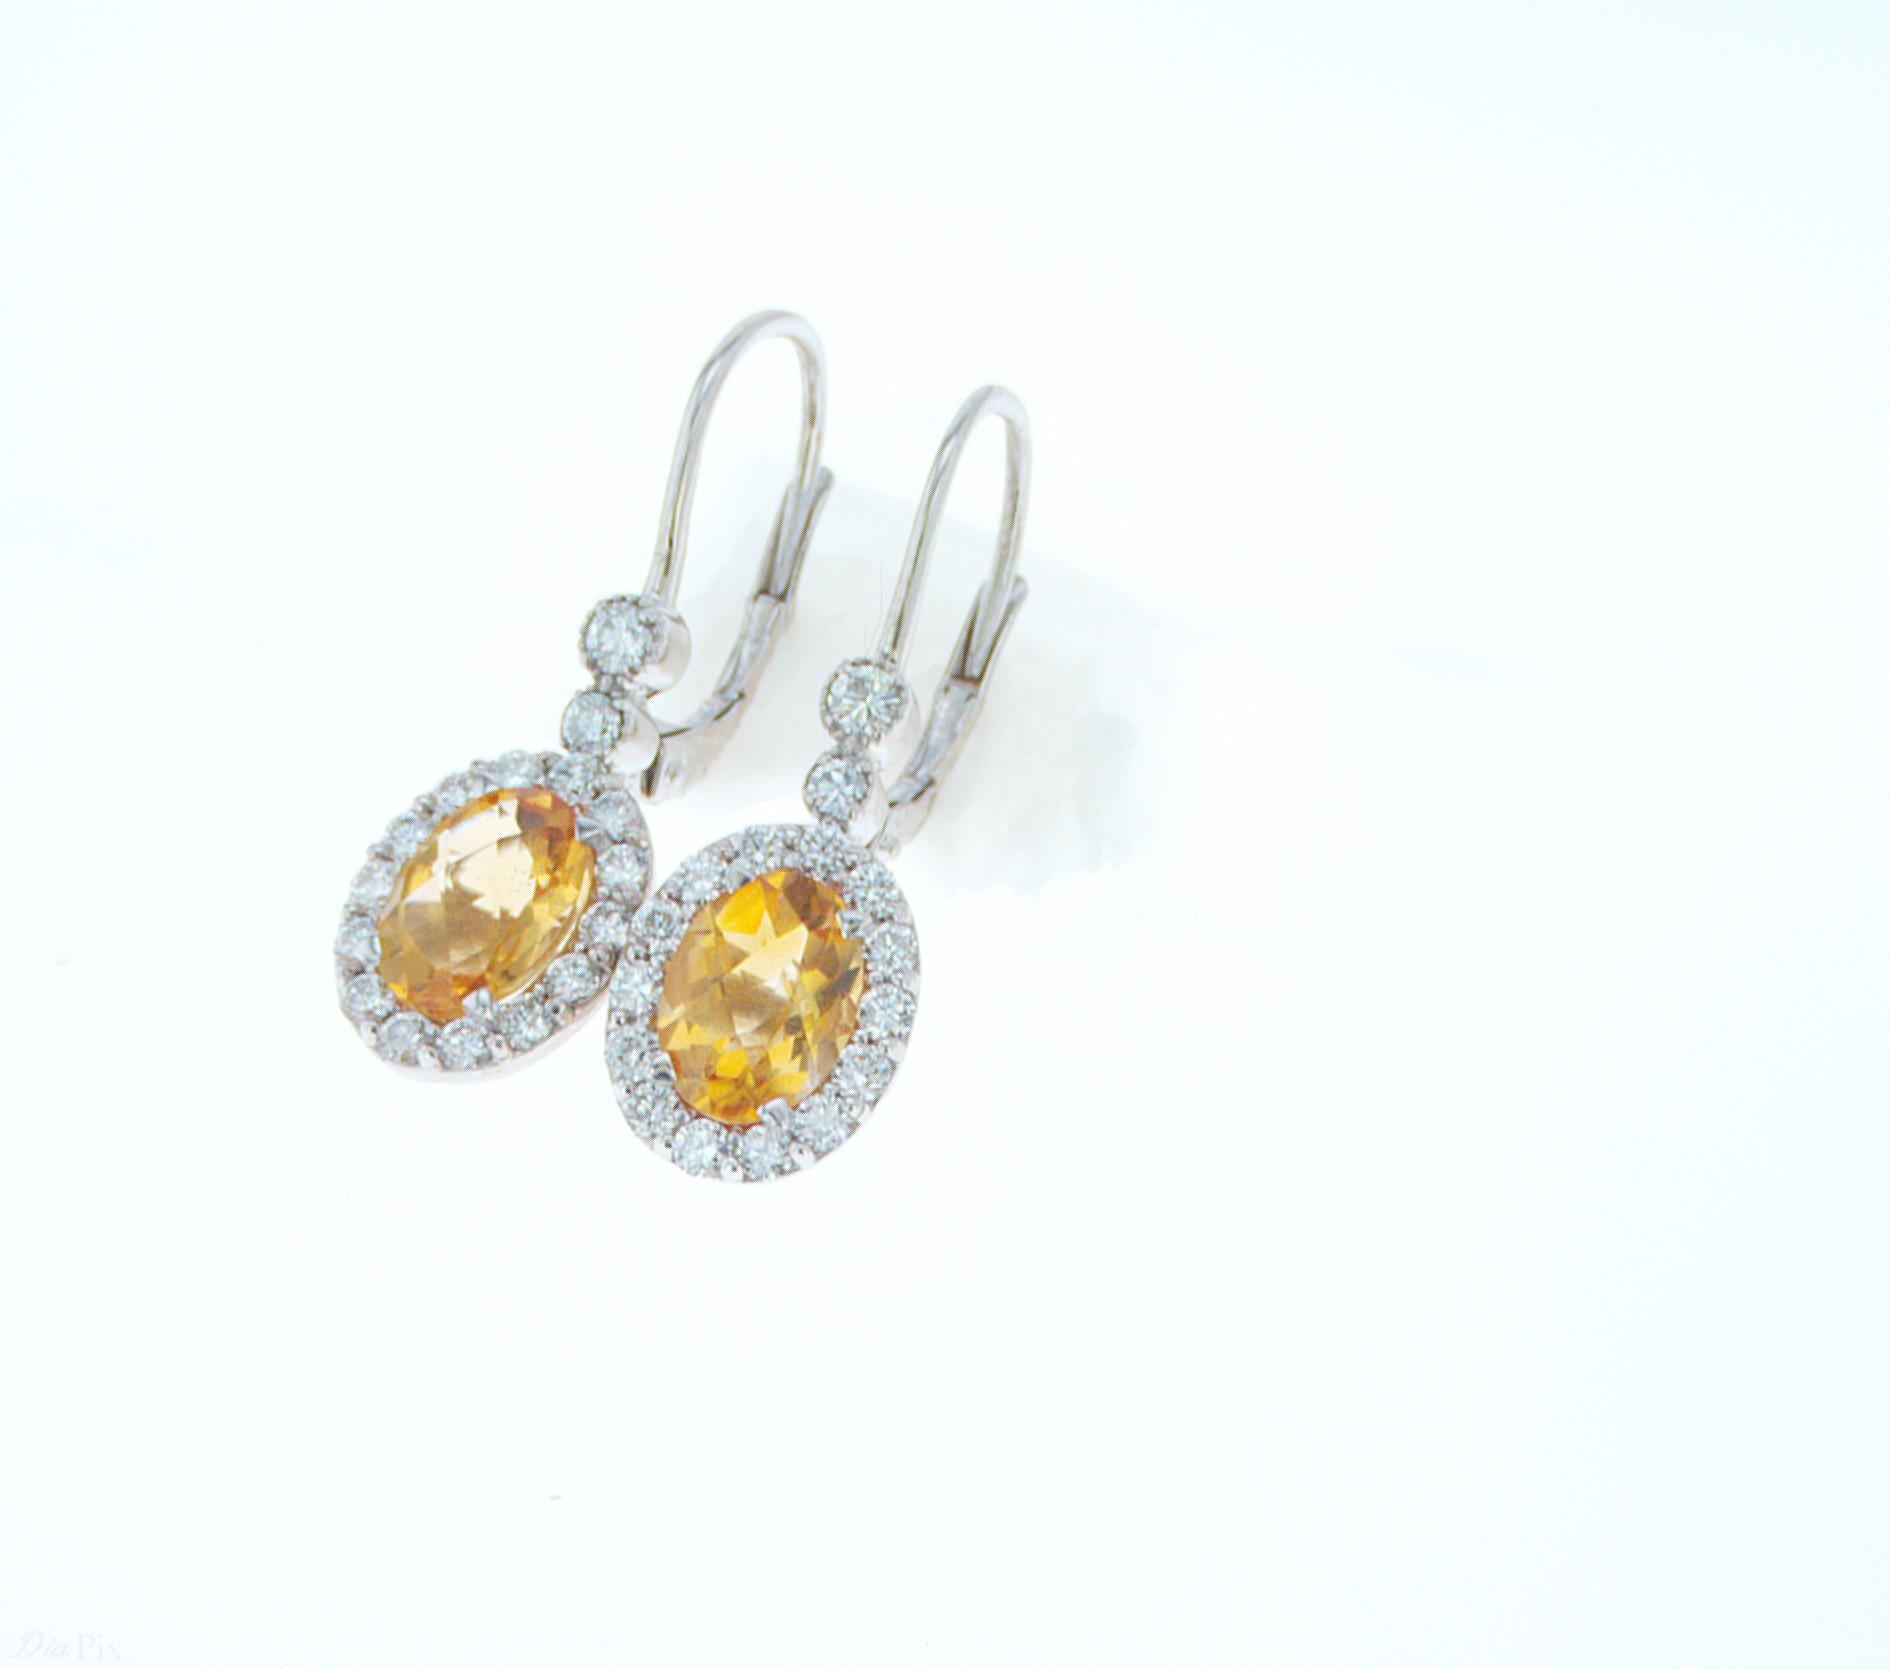 2.21ct TW Oval Citrine Earrings set in 18k White Gold, featuring 0.77ct total weight of accent Diamonds.